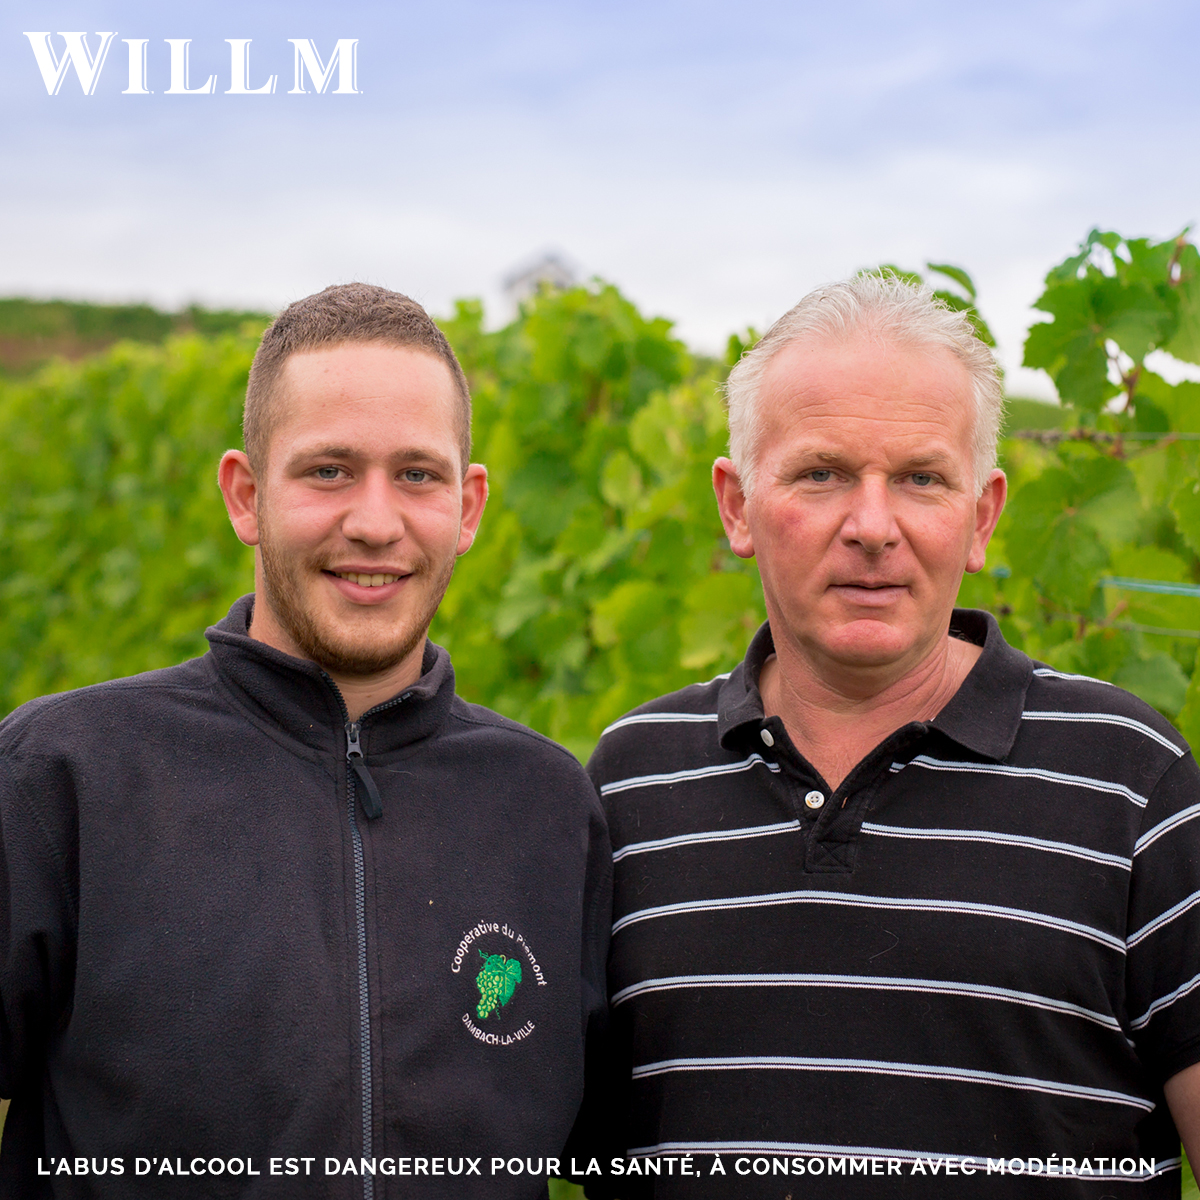 Dominique and Lucas cultivate wine in the #GrandCru Kirchberg de Barr and the Clos Gaensbroennel. They put lots of love into #cultivating their #vines “We are proud to contribute to the production of these fine wines, the fruits of our family’s labor”.